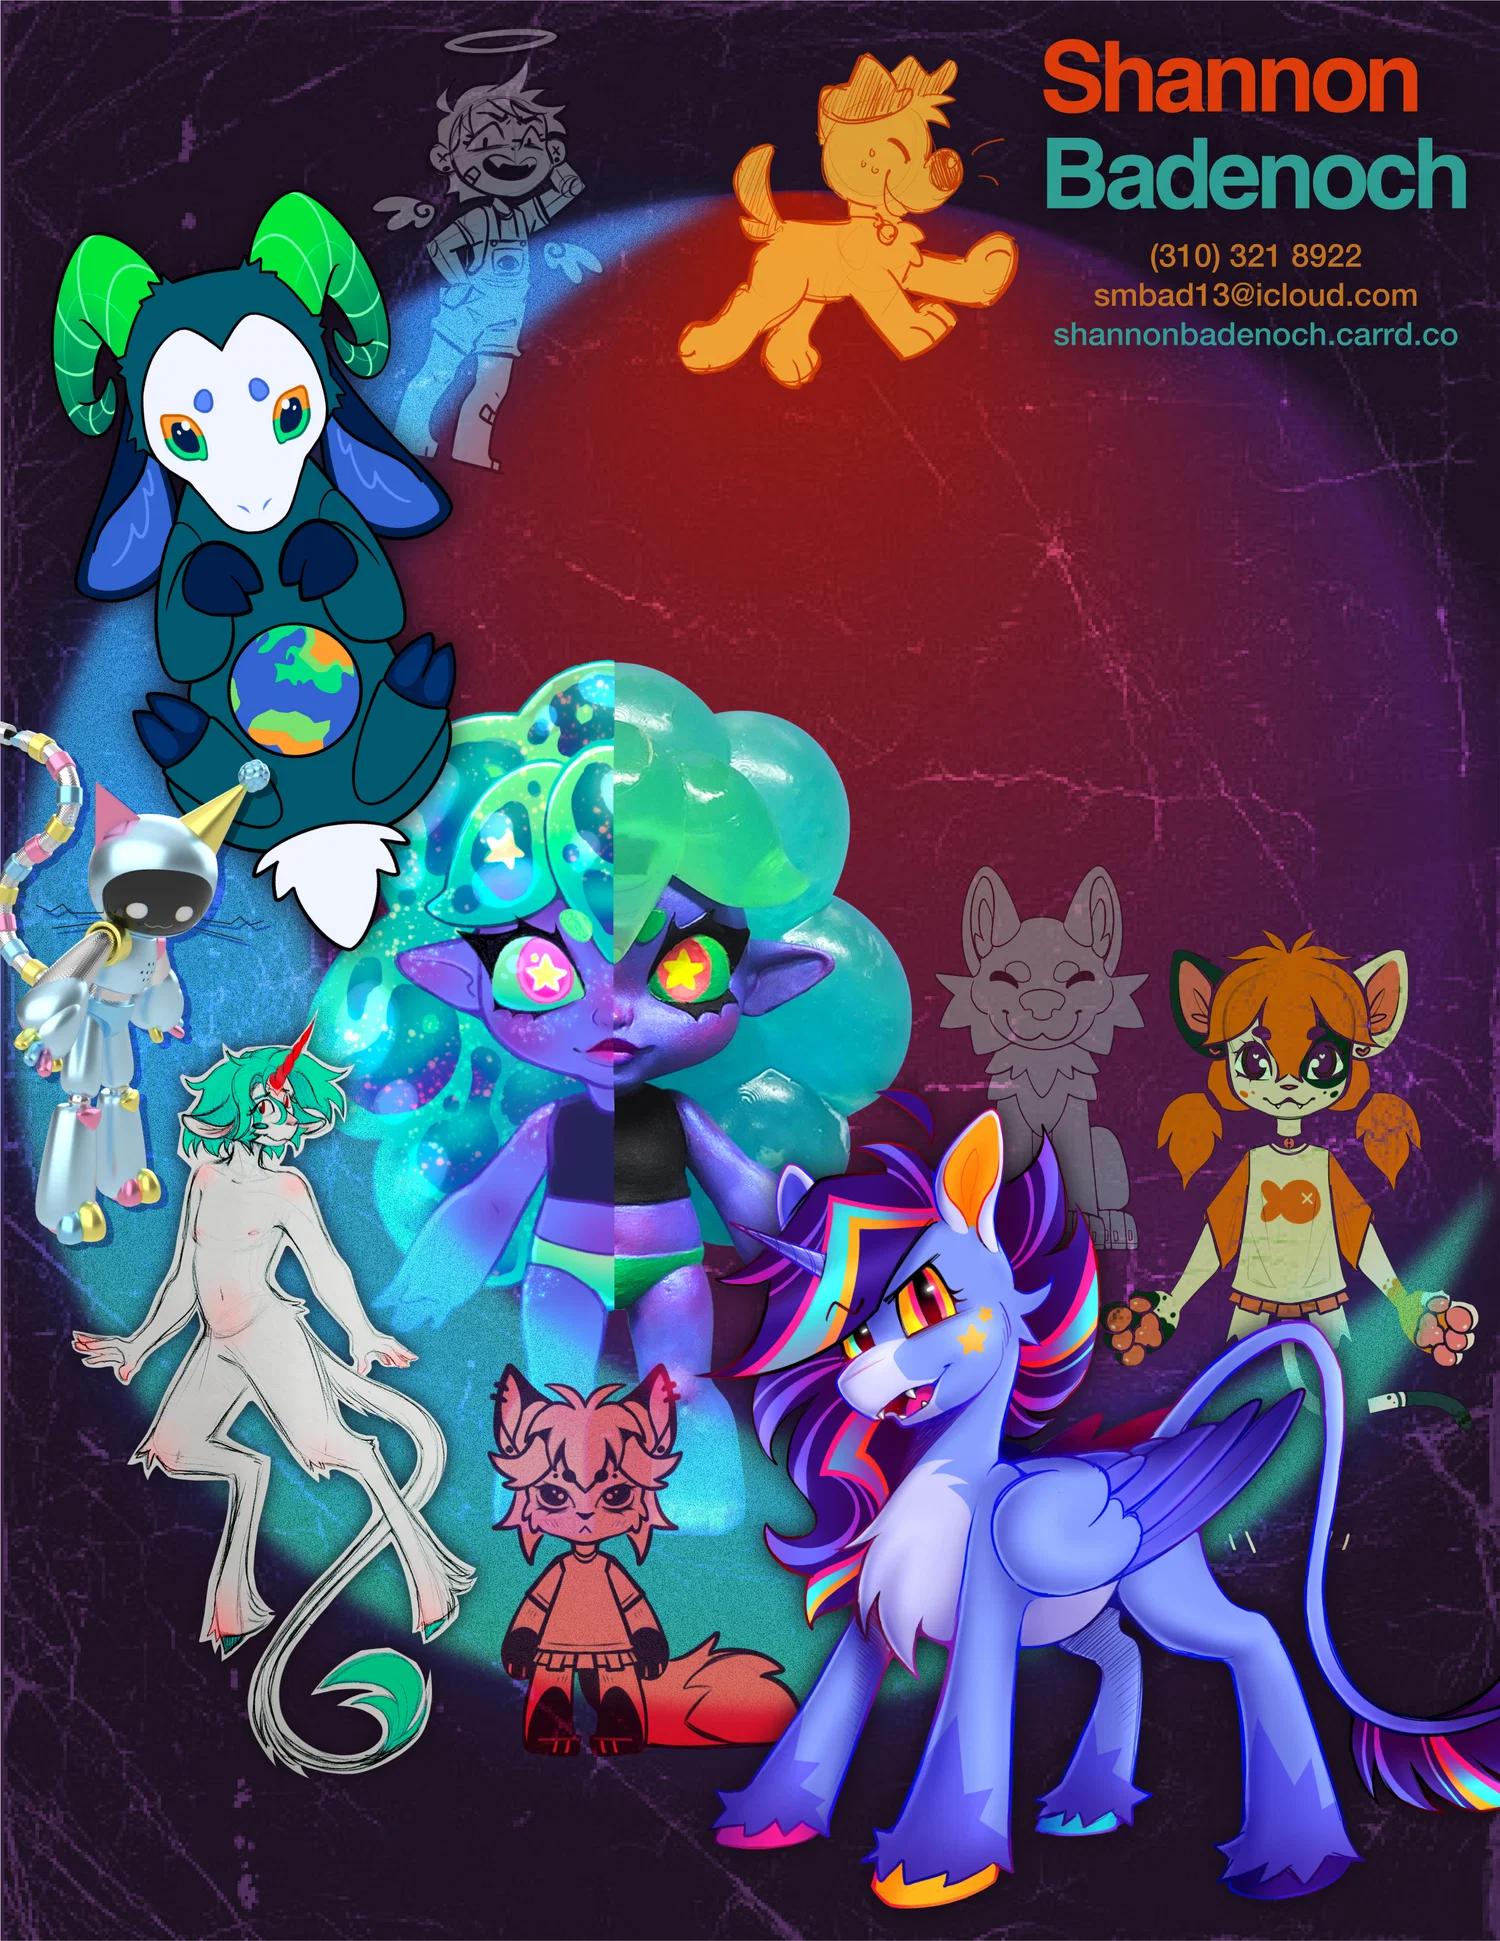 Promo sheet / Portfolio cover showing a compilation of various illustrations and toy concepts.